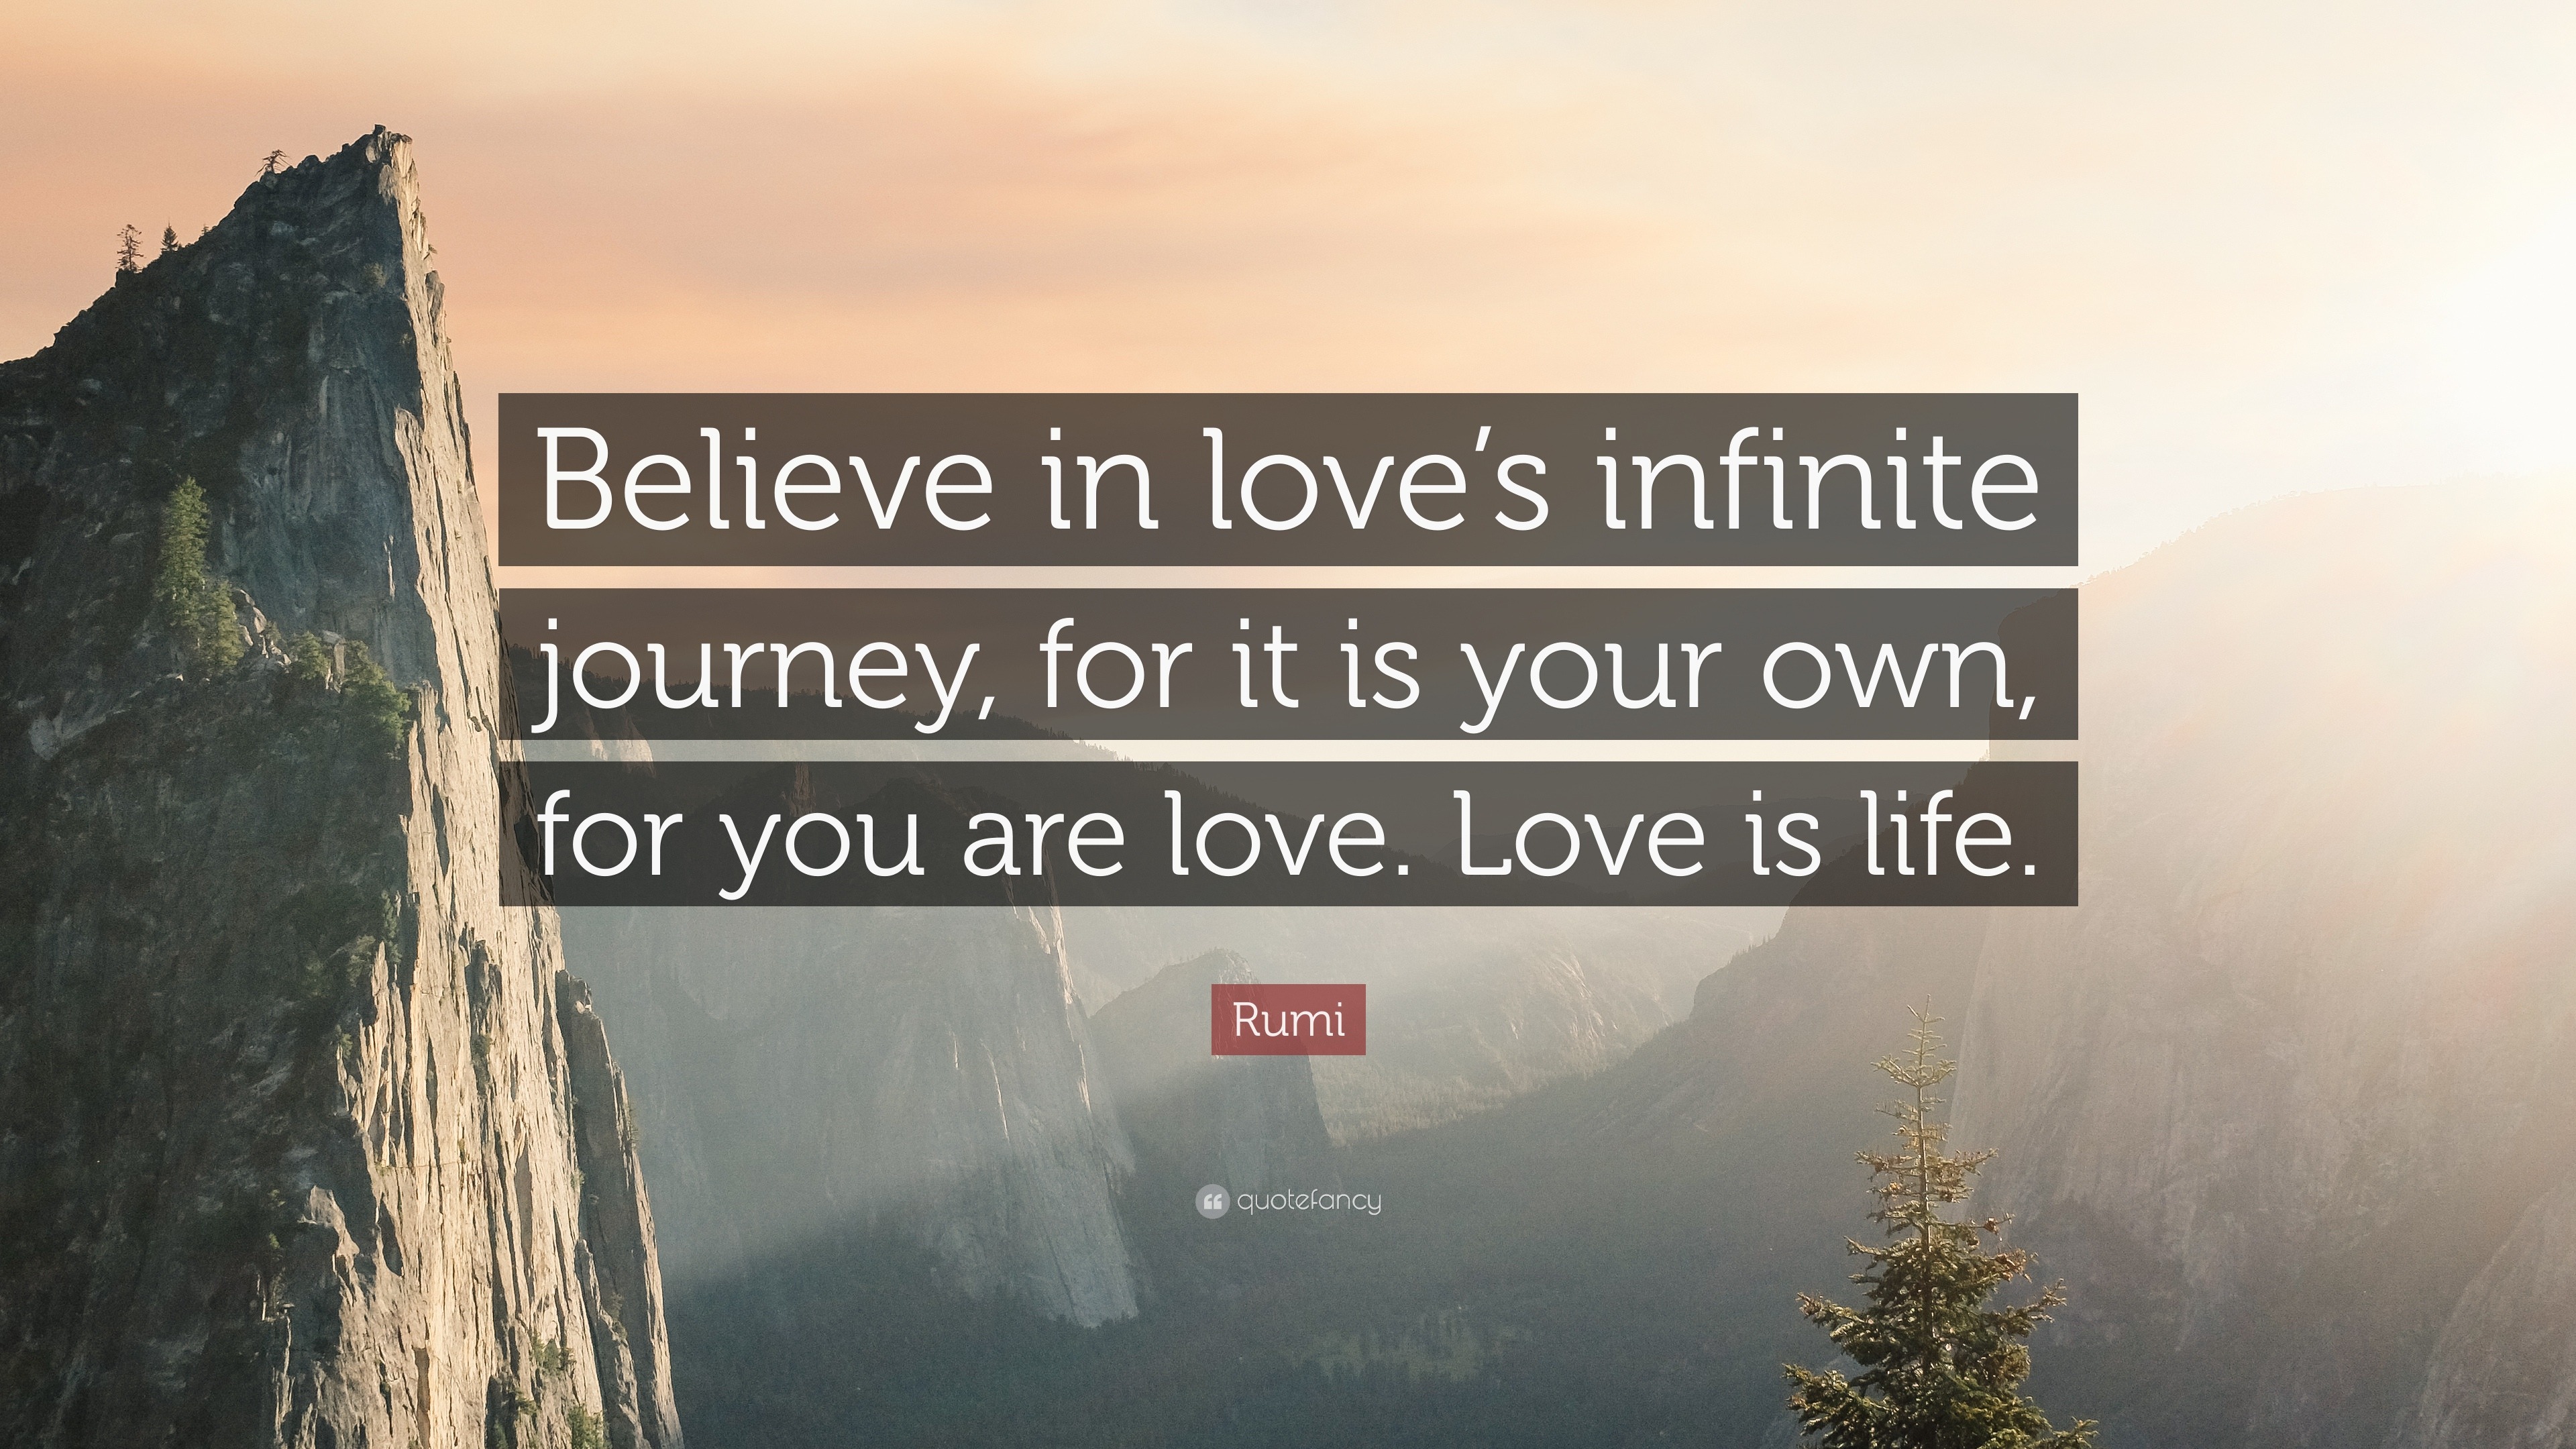 Rumi Quote “Believe in love s infinite journey for it is your own